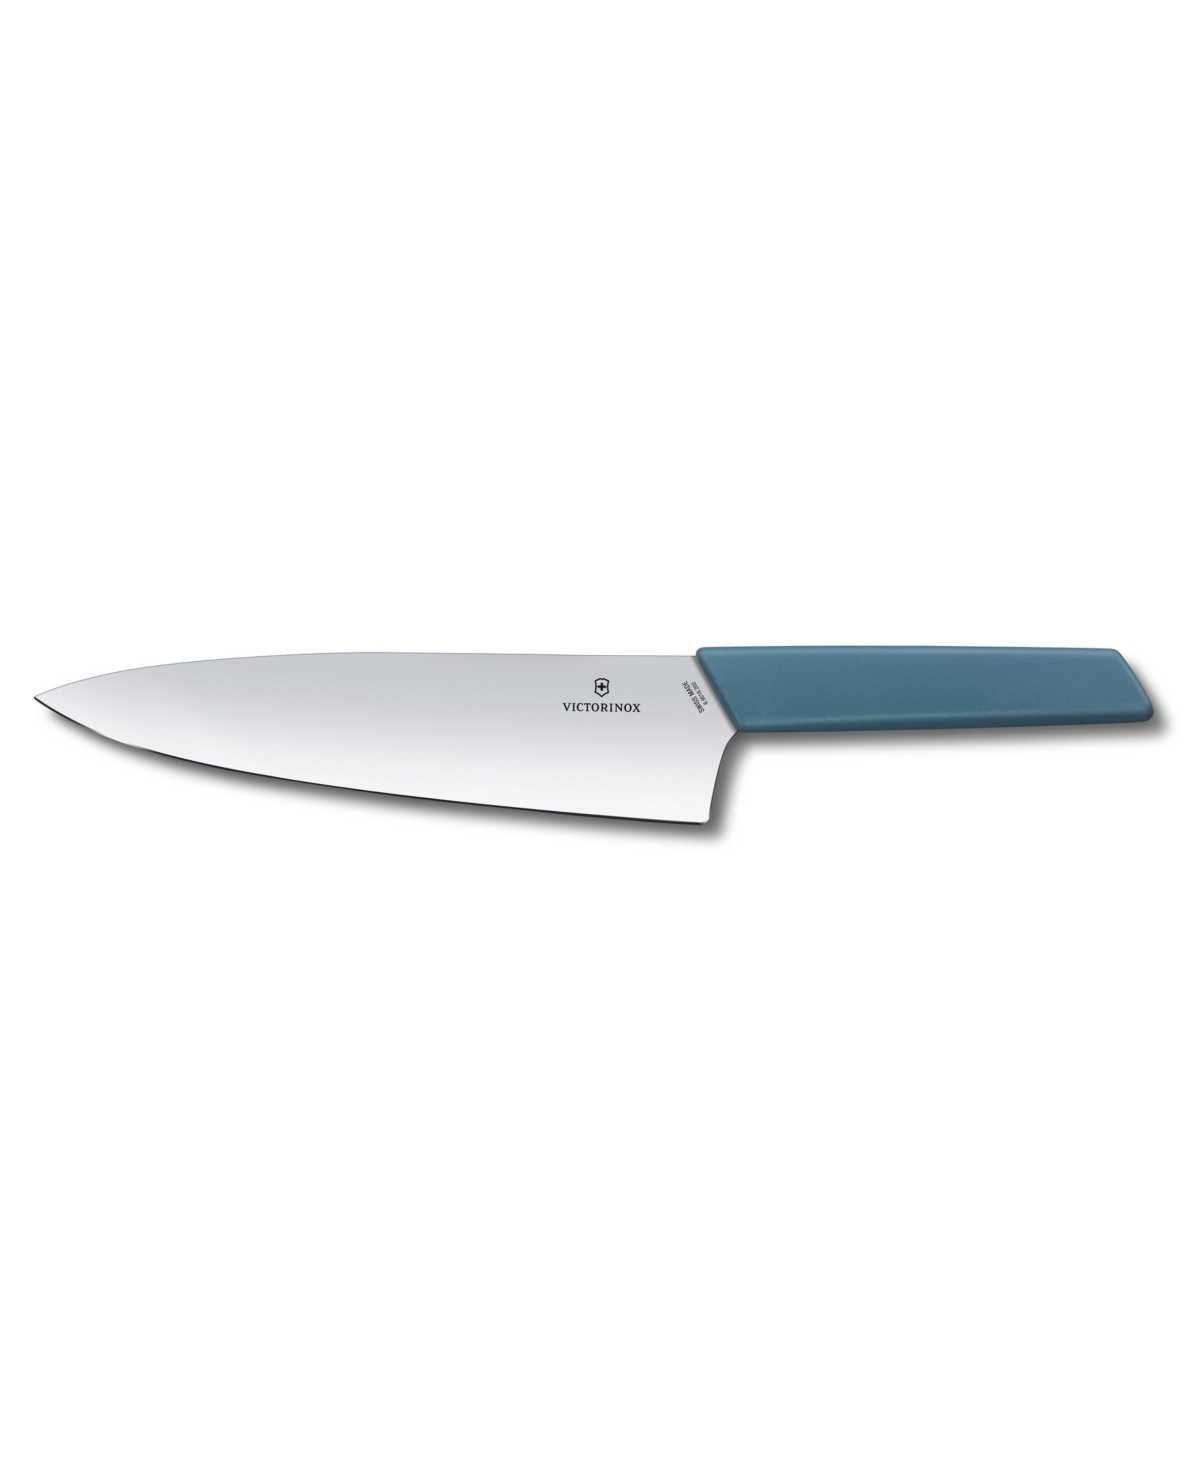 Victorinox Stainless Steel 7.9" Carving Knife In Blue